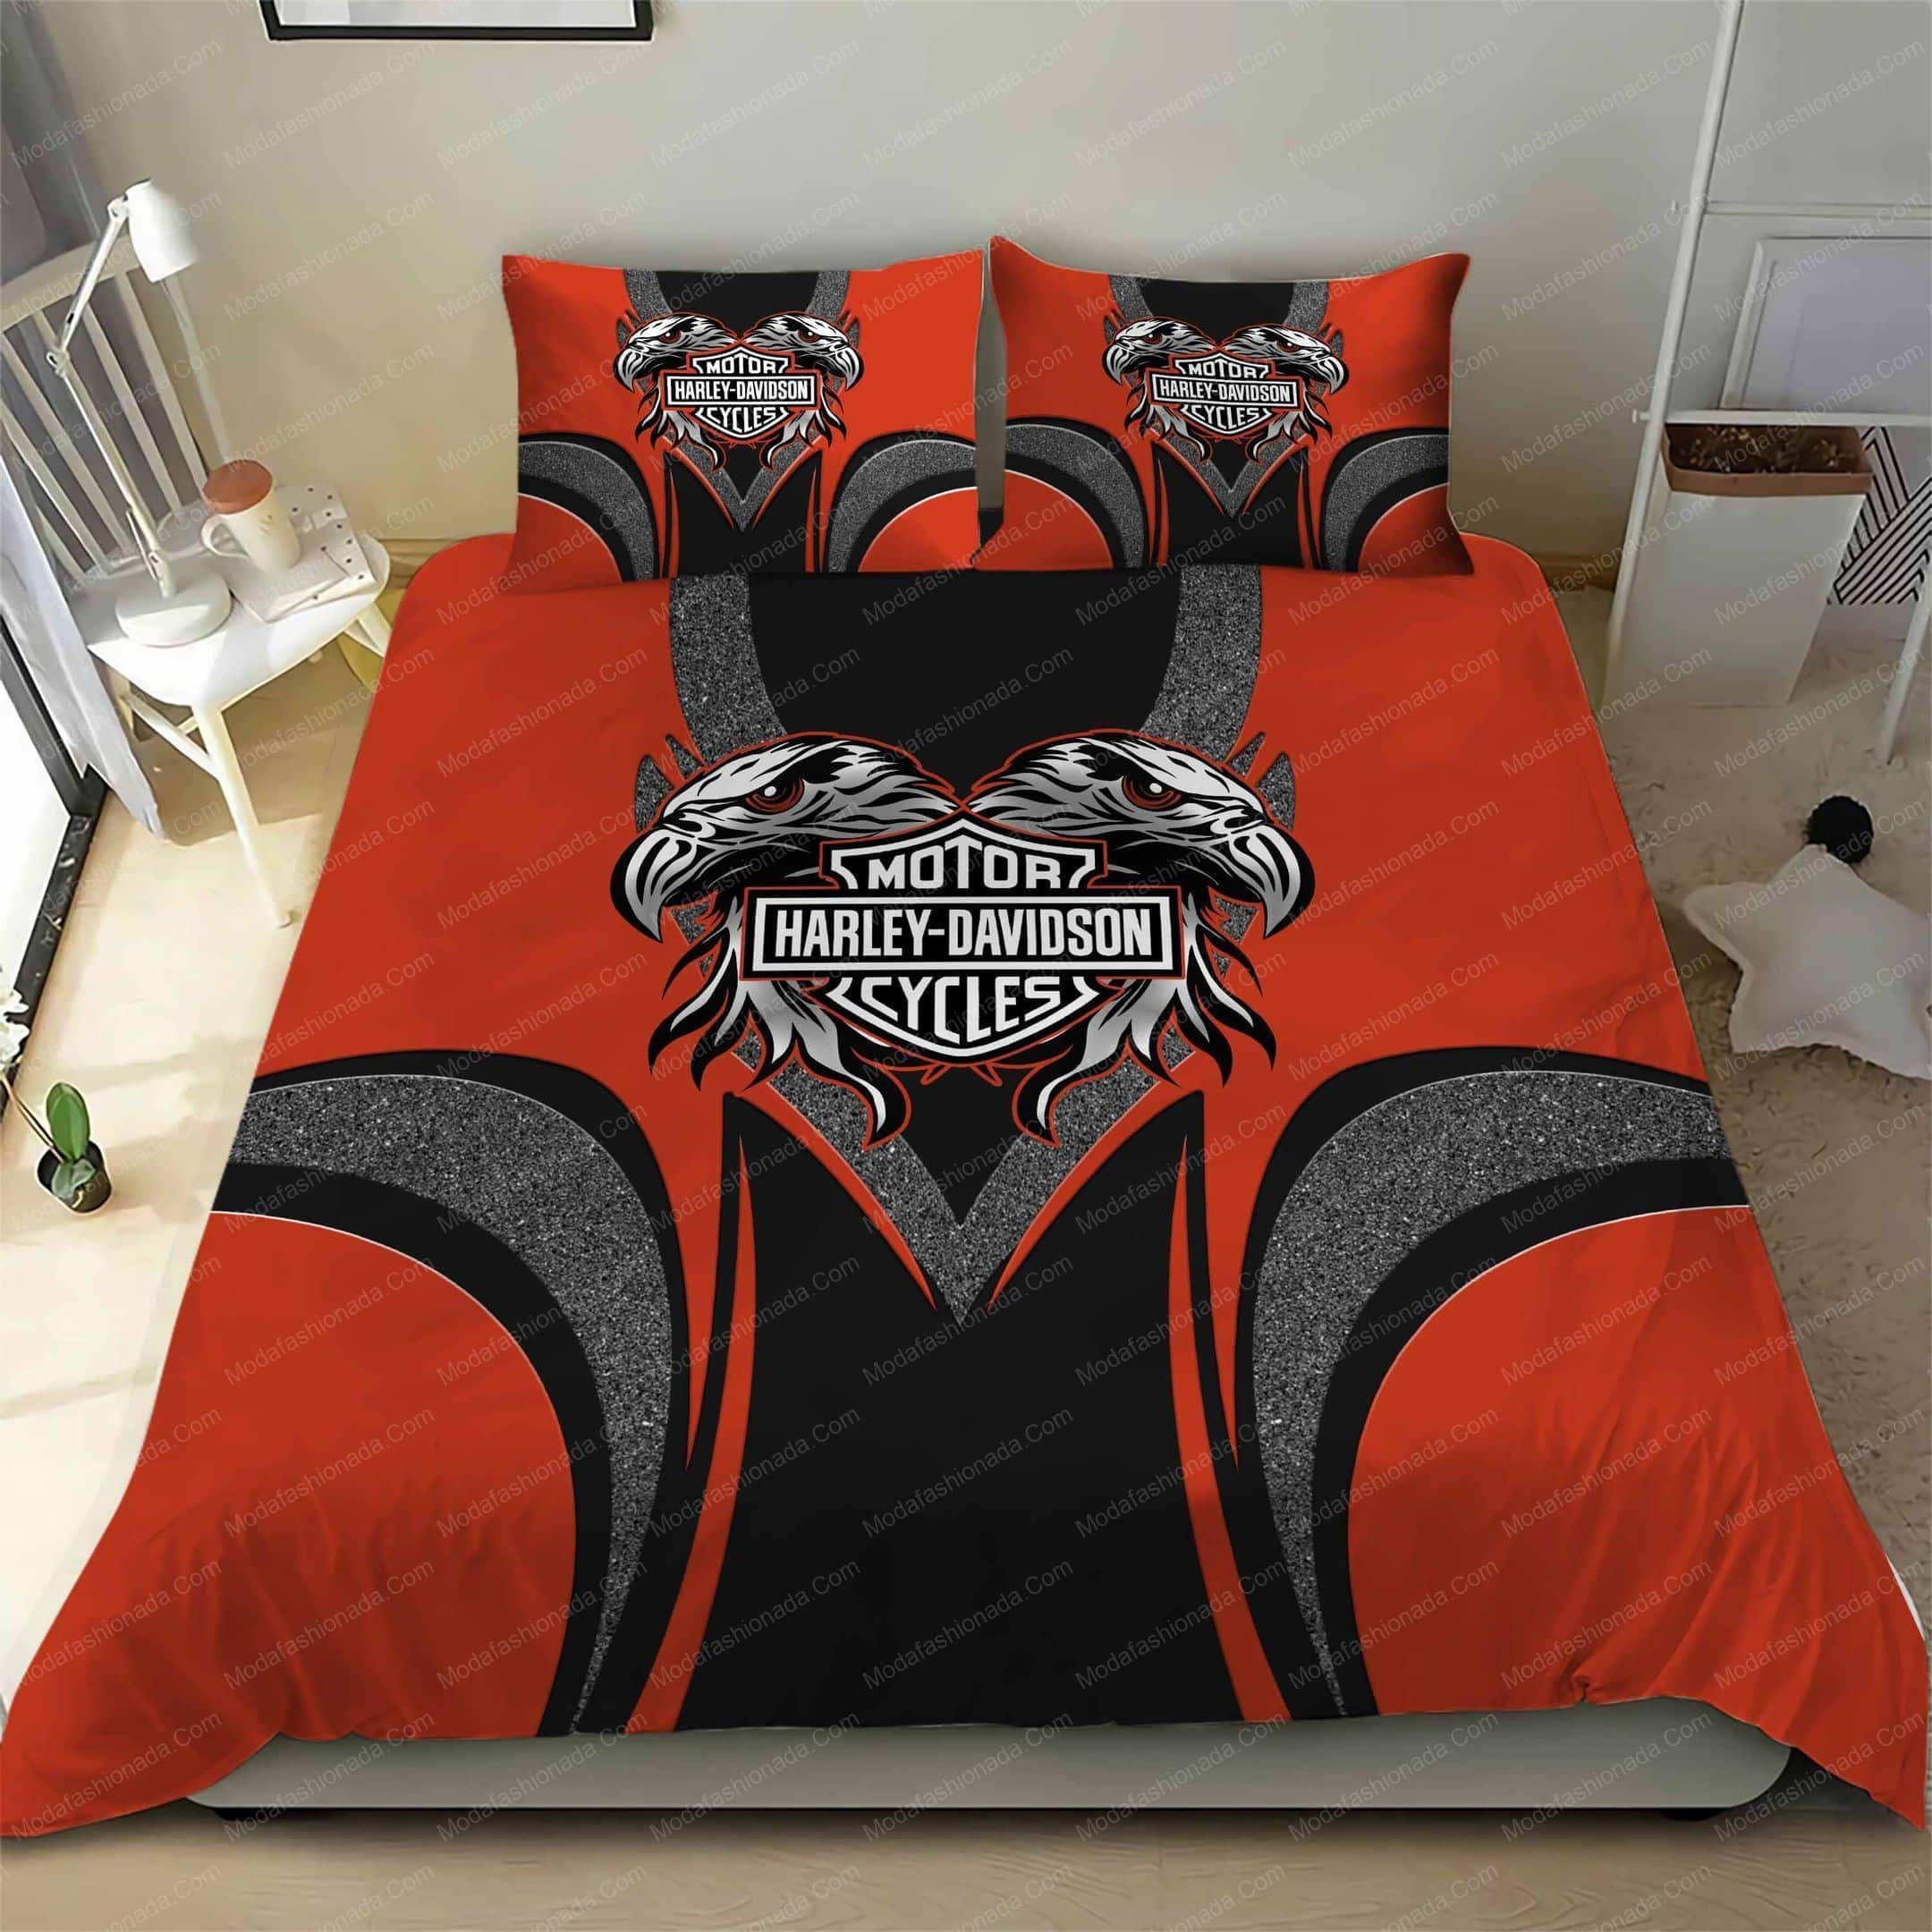 Harley Davidson With 2 Eagles And Motorcycles Logo 92 Bedding Set